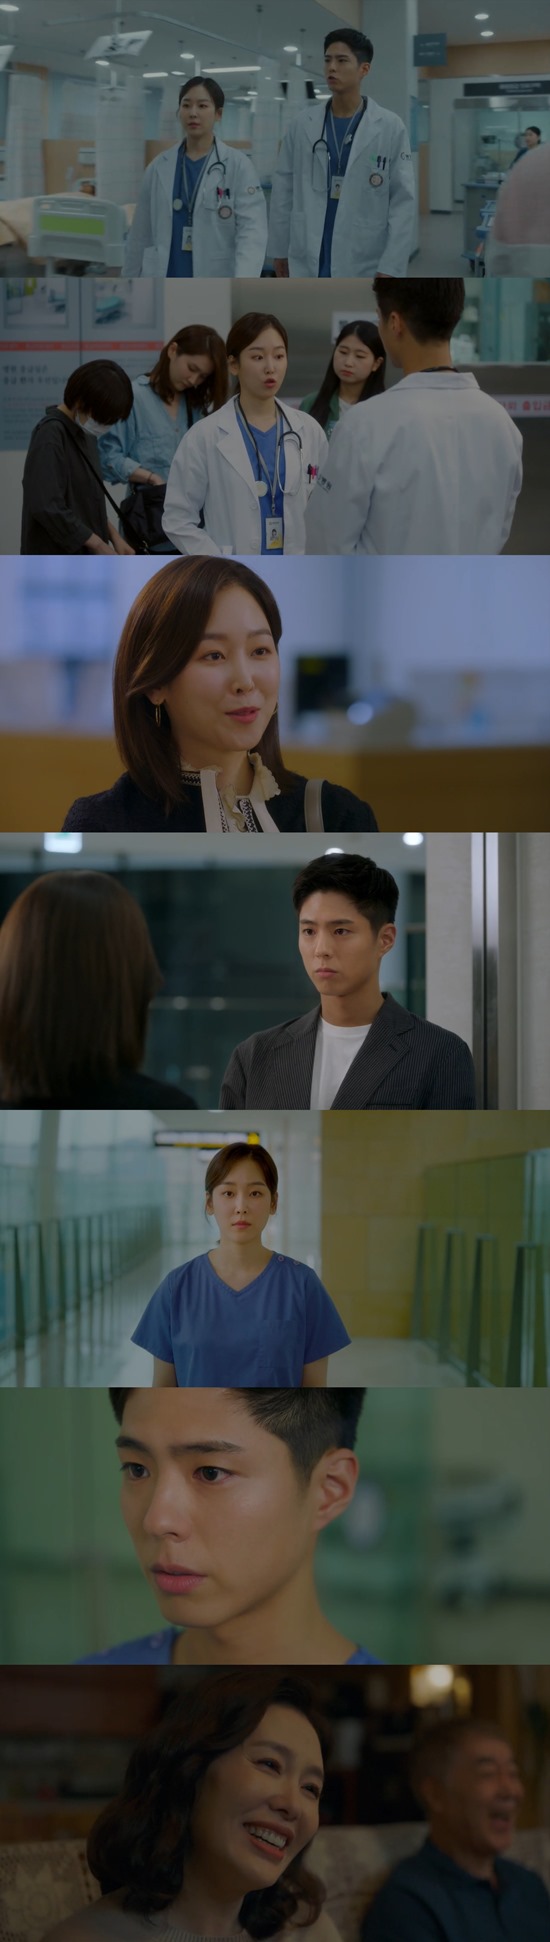 Seo Hyun-jin made a special appearance on Record of Youth, making Park Bo-gum and a warm chemistry.In TVN Record of Youth broadcast on the 28th, Sa Hye-joon (Park Bo-gum), who is auditioning for a new audition, was portrayed.Sa Hye-joon, who auditioned with the staff at the audition hall on the day. He captivated the director with his relaxed appearance.After the audition, Lee Min-jae (Shin Dong-mi) was delighted to hear the news of Sa Hye-joons passing. Sa Hye-joon also smiled at the text saying, Lets just walk the flower path.And Sa Hye-joon, who played the role of a doctor in Gateway, worked with Lee Hyun-soo (Seo Hyun-jin).Sa Hye-joon was stuck next to Lee Hyun-soo and spit out a medical term-filled ambassador and continued acting, and suddenly he had to make a mistake.Lee Hyun-soo, who watched Sa Hye-jun shout Im sorry for the extension, said, Its okay. Medical terminology is really difficult. Im going to burst my head.You are growing up too, he advised.However, after finishing the filming, Sa Hye-joon stayed and memorized medical terms. Lee Hyun-soo, who saw this, asked, When are you going to stay here?Lee Hyun-soo, who saw a full-fledged Sa Hye-joon, said, Simulation at home. Next god. Its Huger. Lets not back. Next time, call me sister.Thanks to Lee Hyun-soos advice, Sa Hye-joon showed further development. And Sa Hye-joon confessed to Lee Hyun-soo at Gateway, Do you want to make a sister?Seo Hyun-jin, who made a special appearance as a top star in the drama, naturally melted into Record of Youth.Seo Hyun-jin, who visited the house theater for a long time after Black Dog, still boasted his acting ability to believe and see.Park Bo-gum and a warm-hearted senior chemistry, Record of Youth in Gateway, as well as the audience theater was happy to be happy.Photo = TVN broadcast screen